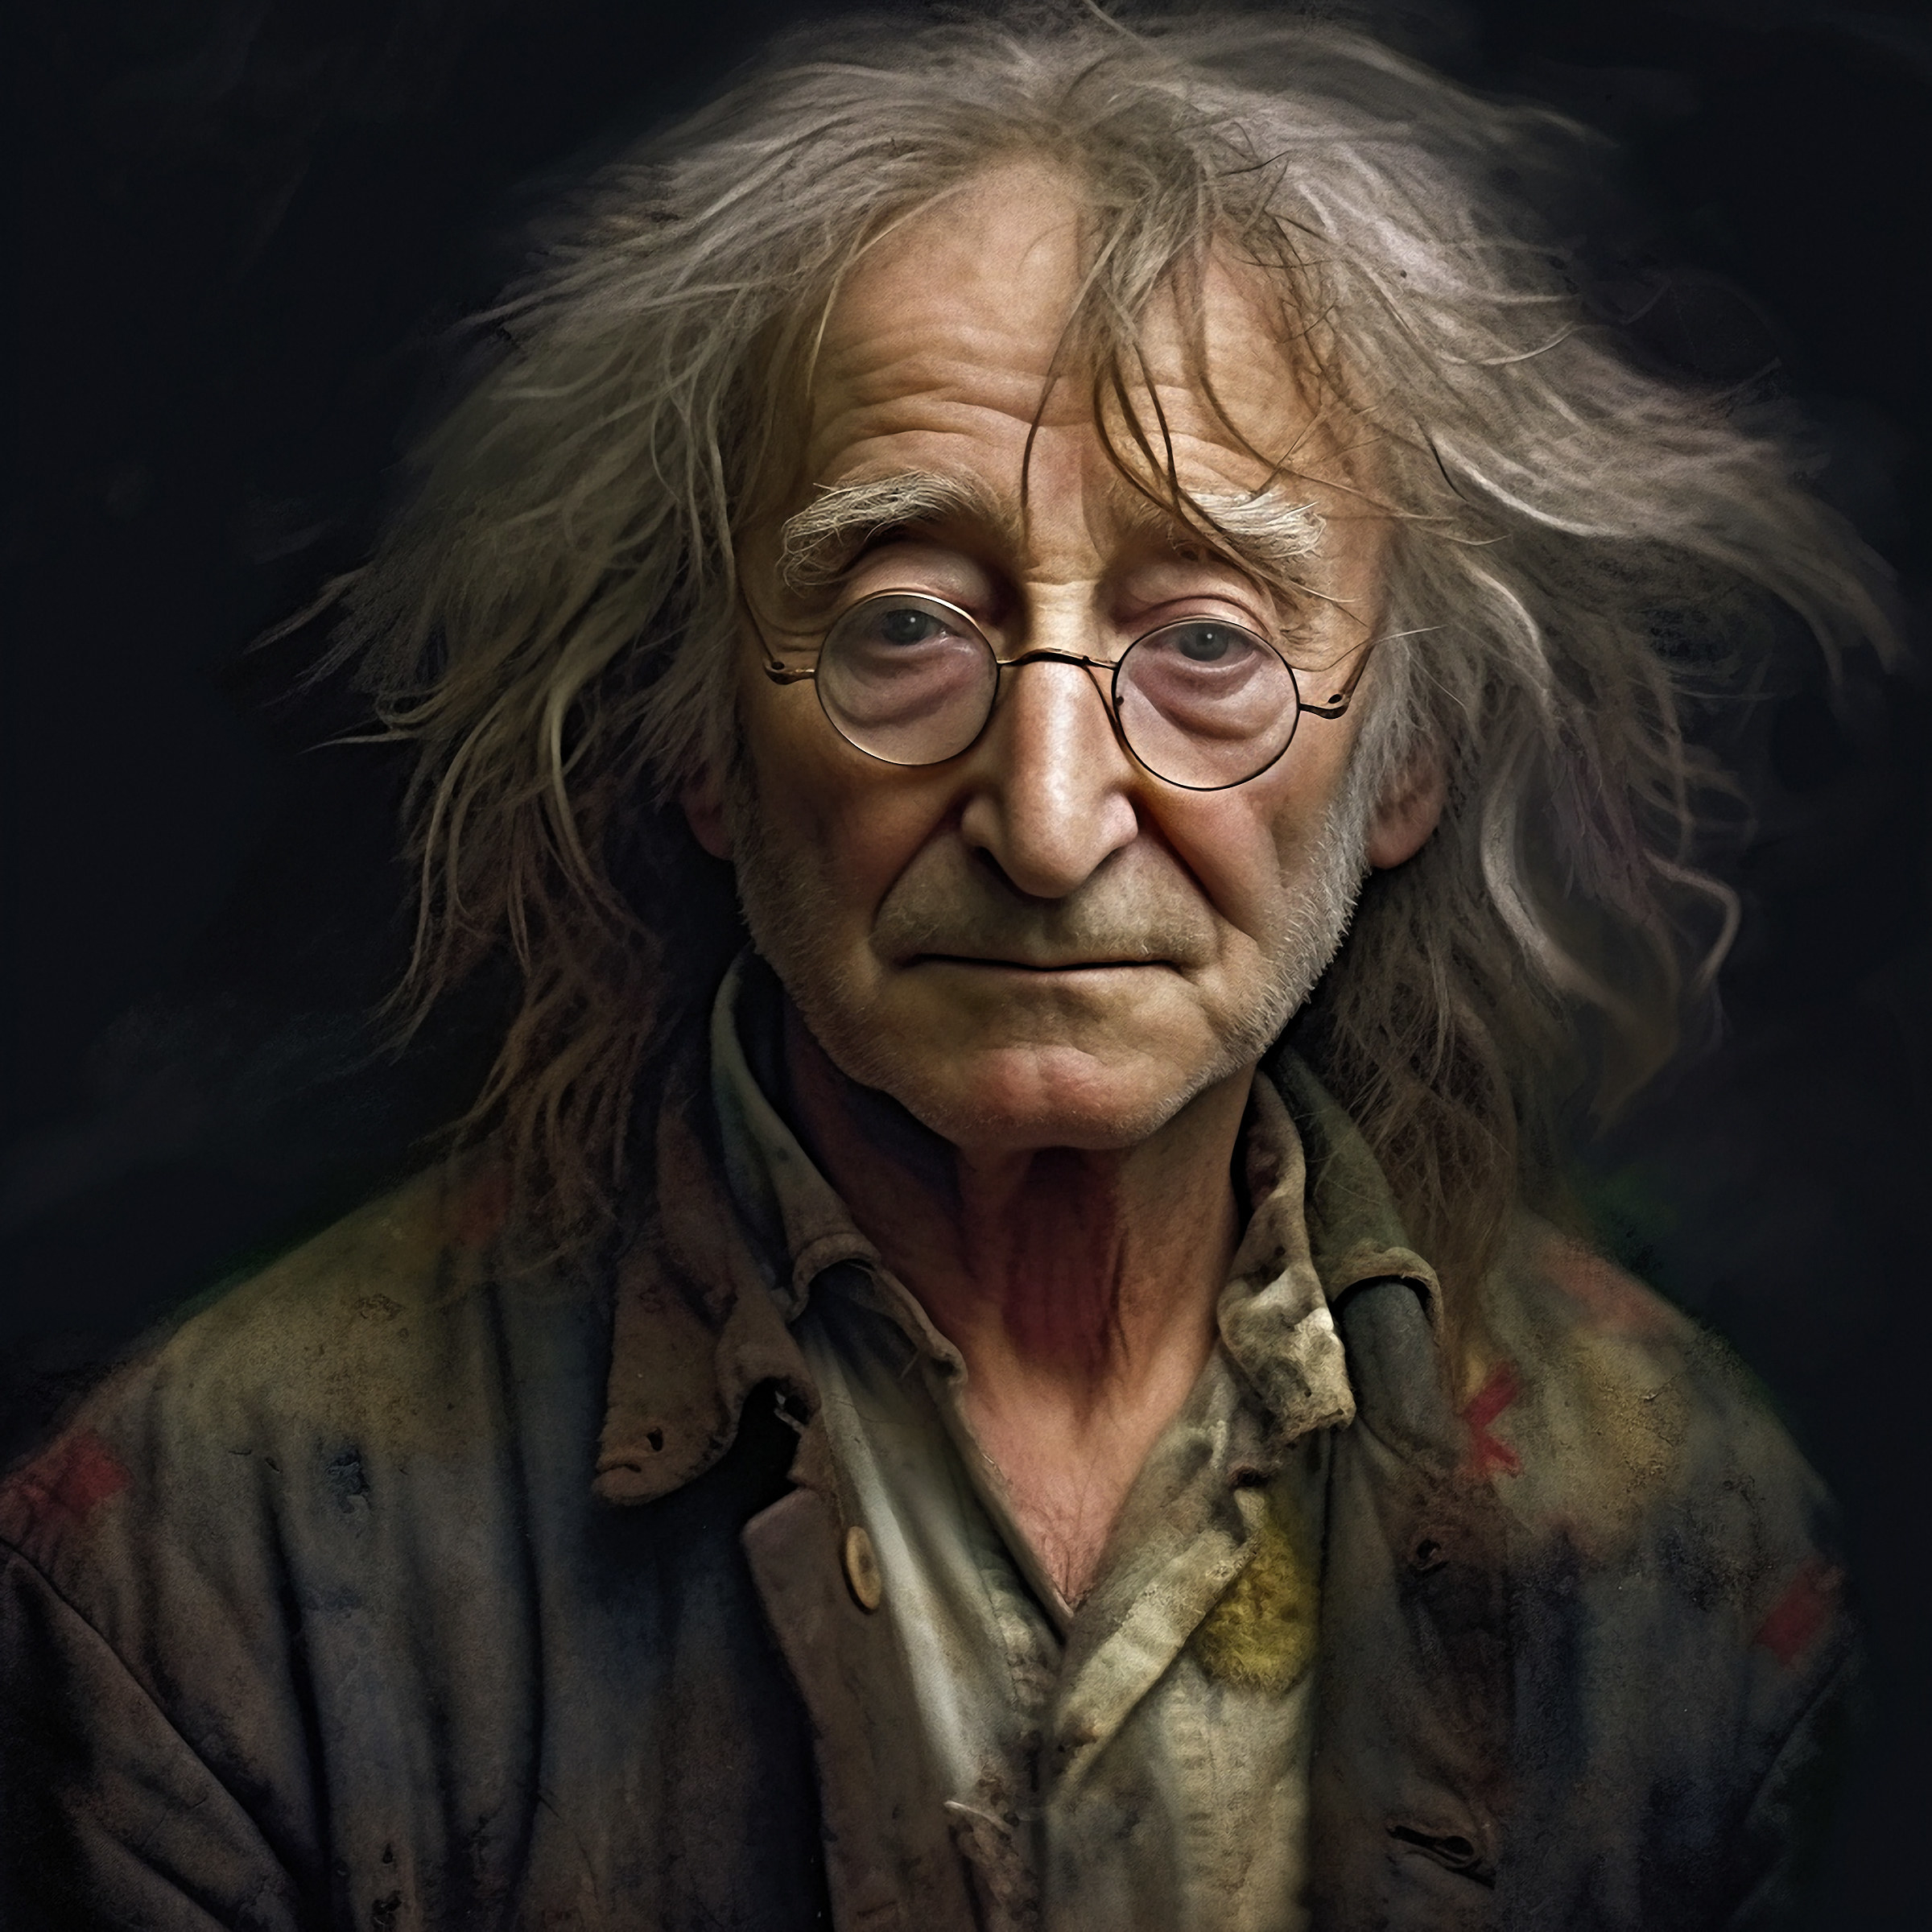 Lennon imagined as an older person